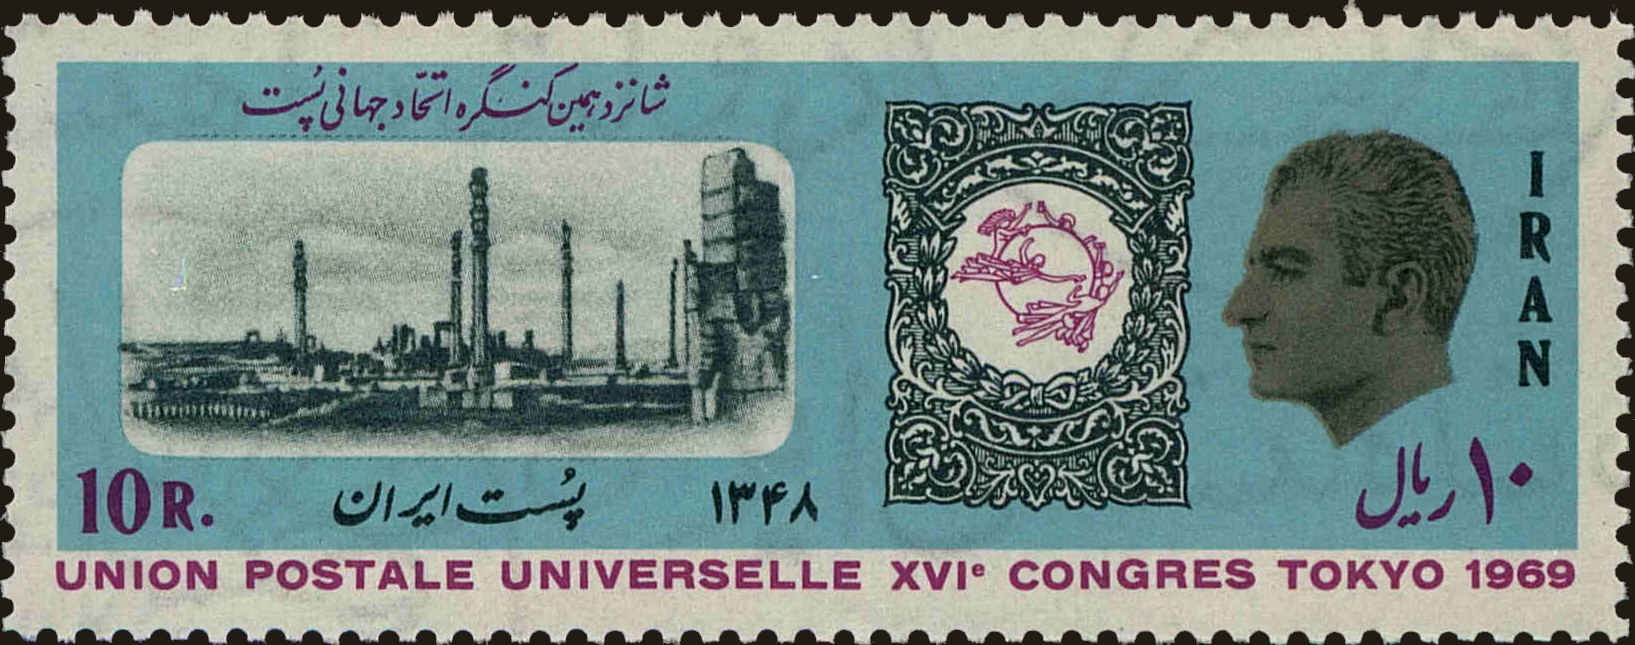 Front view of Iran 1522 collectors stamp